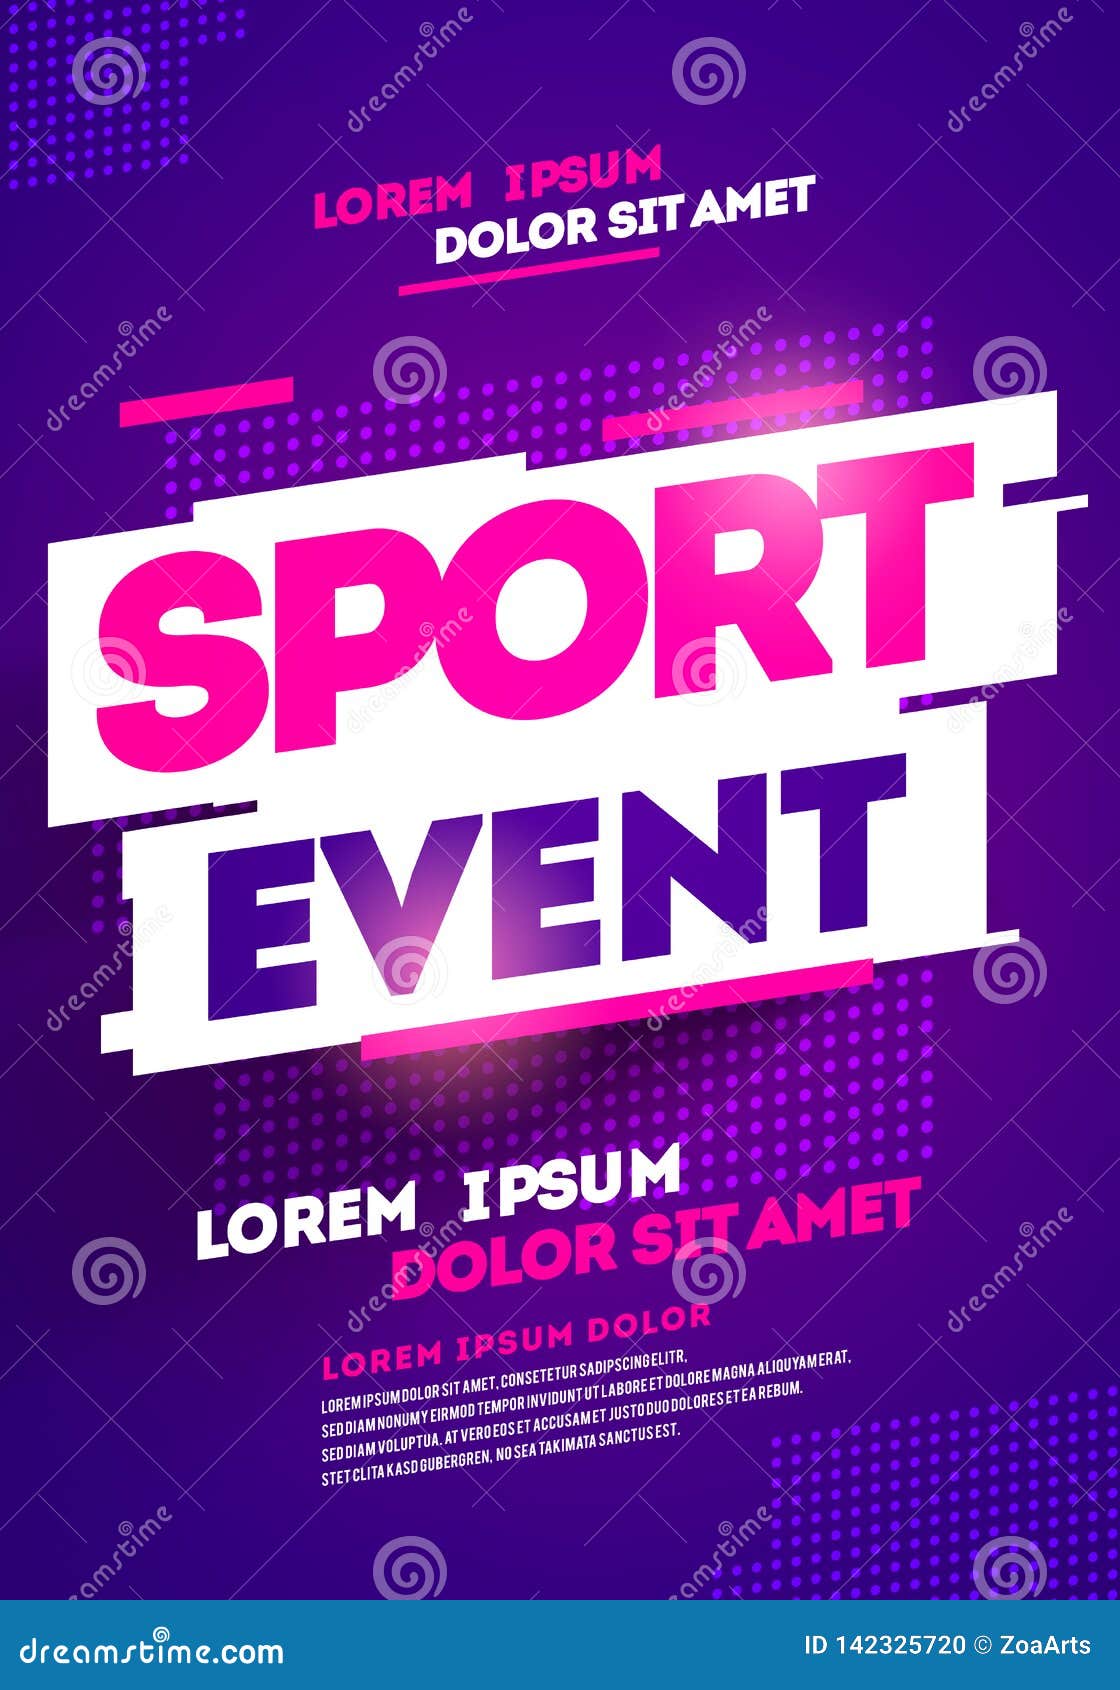 layout poster template  for sport event, tournament or championship.